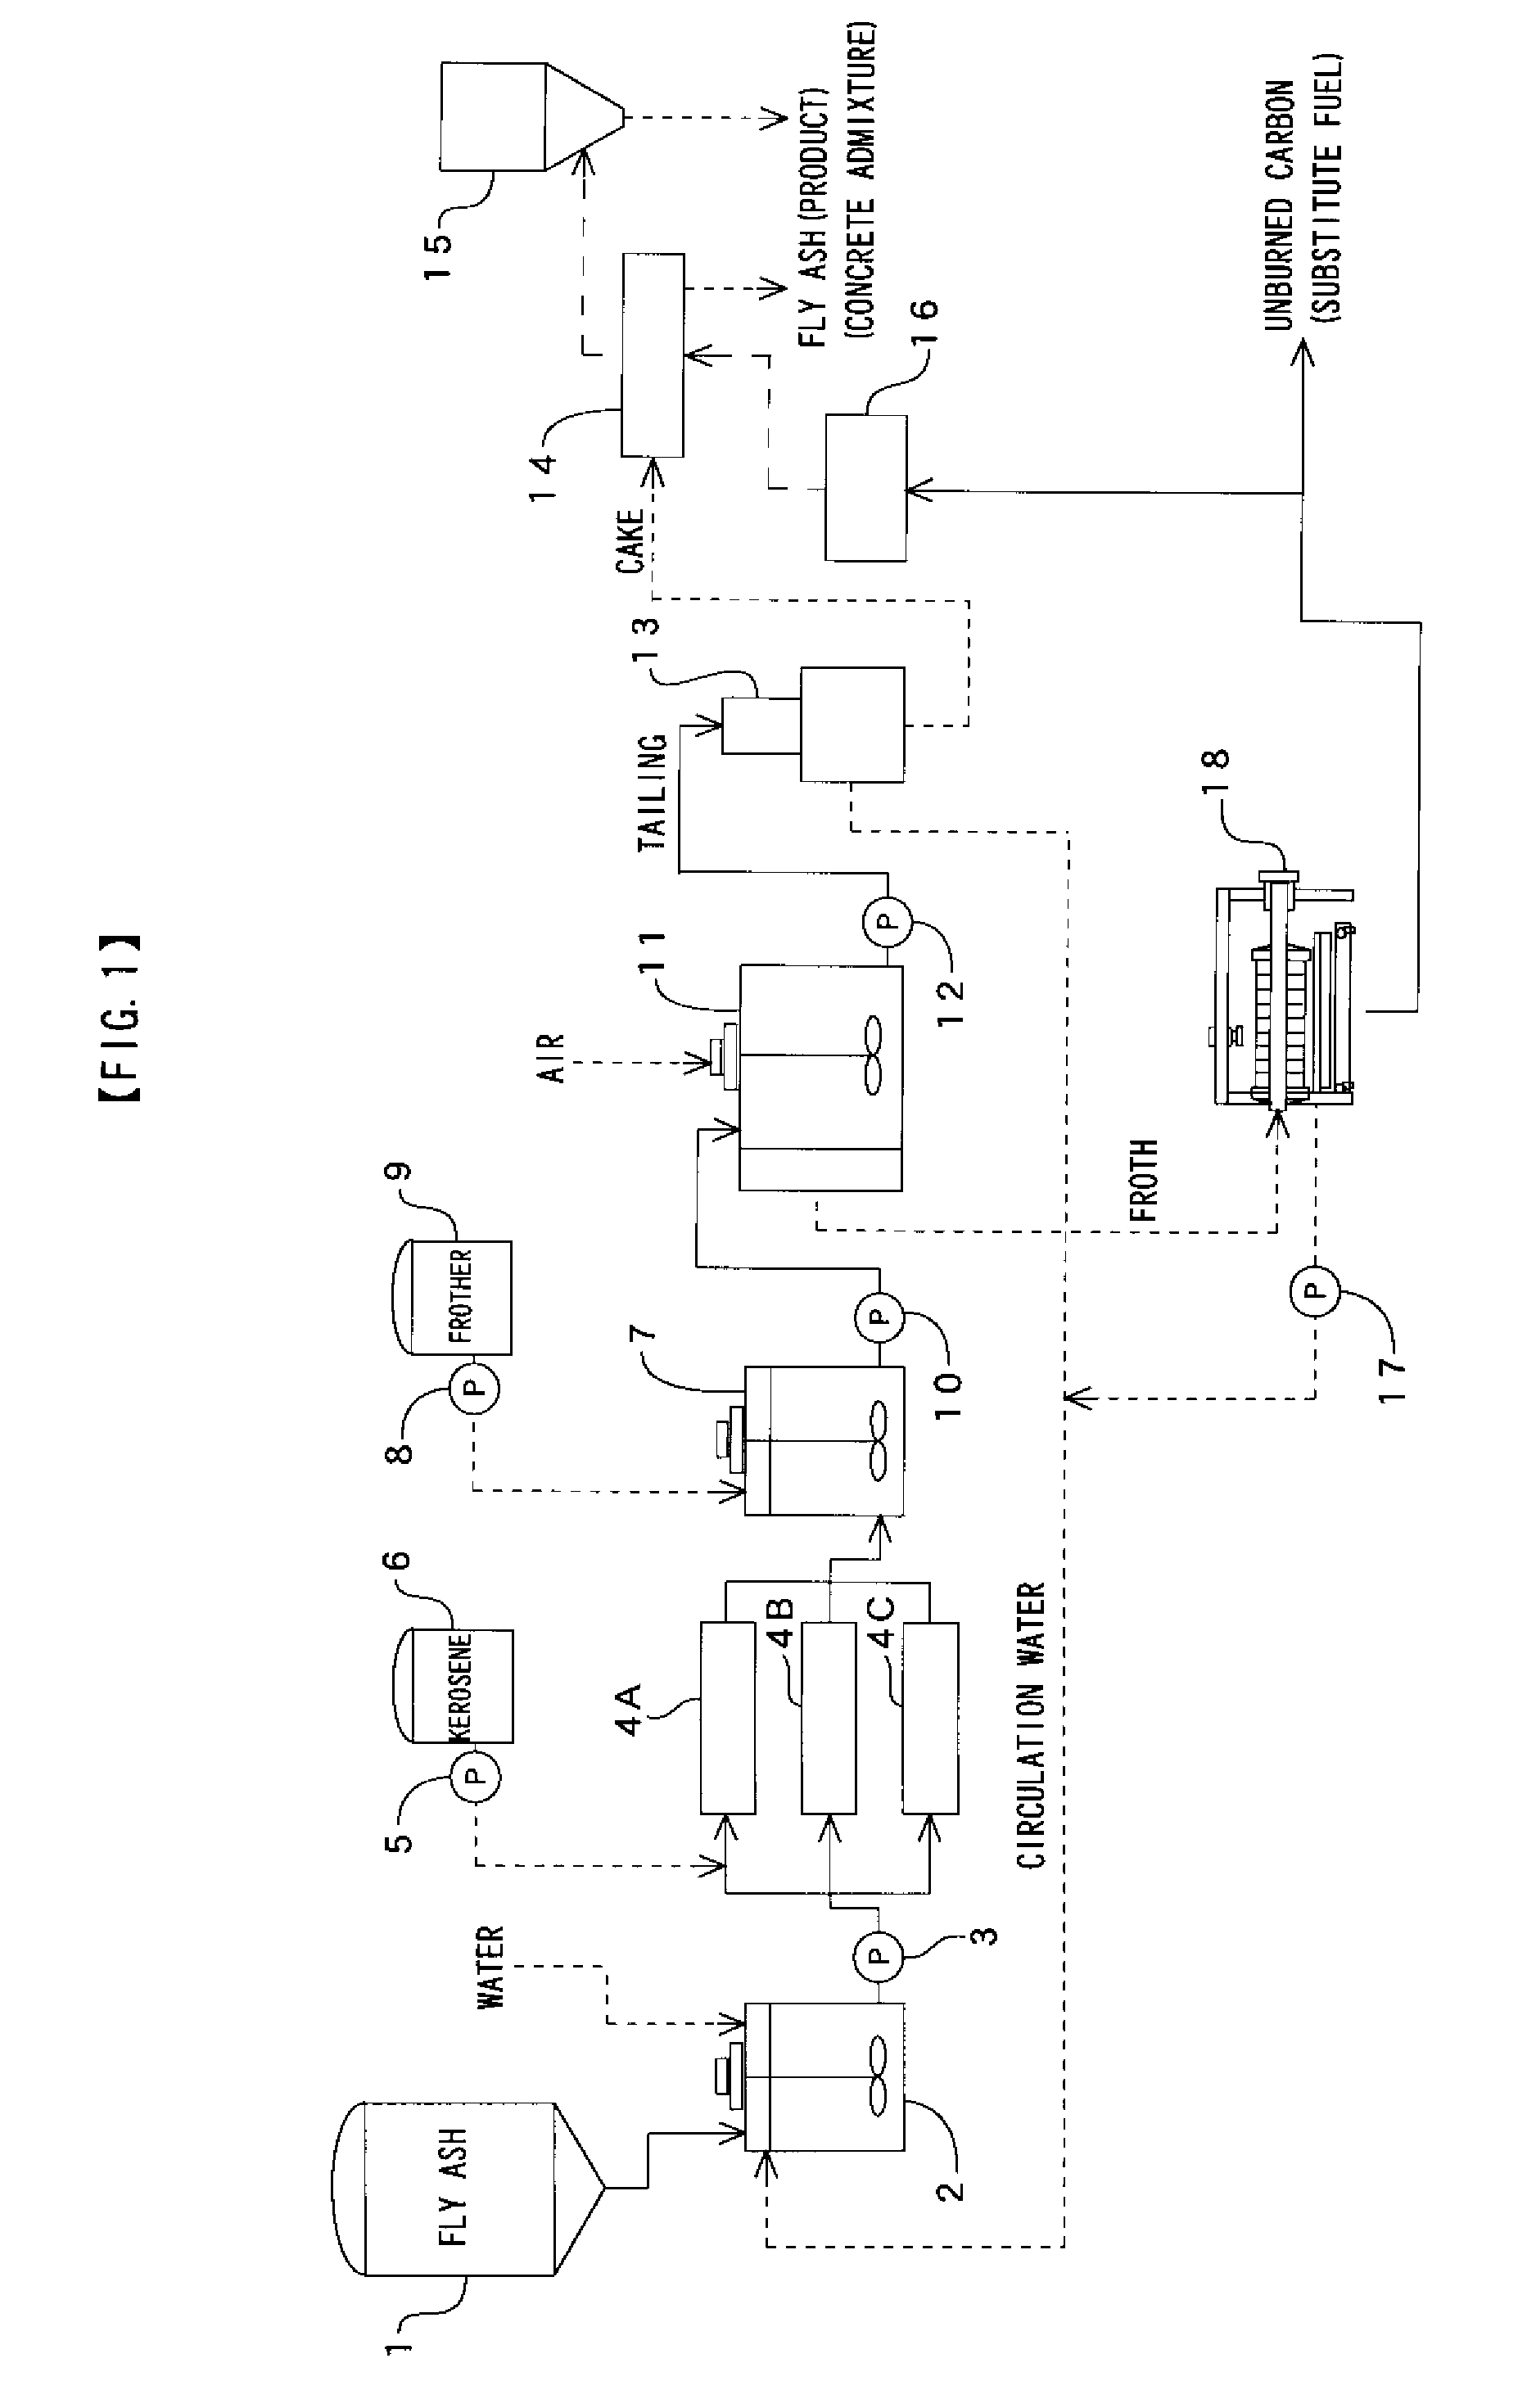 Apparatus and method for removing unburned carbon from fly ash